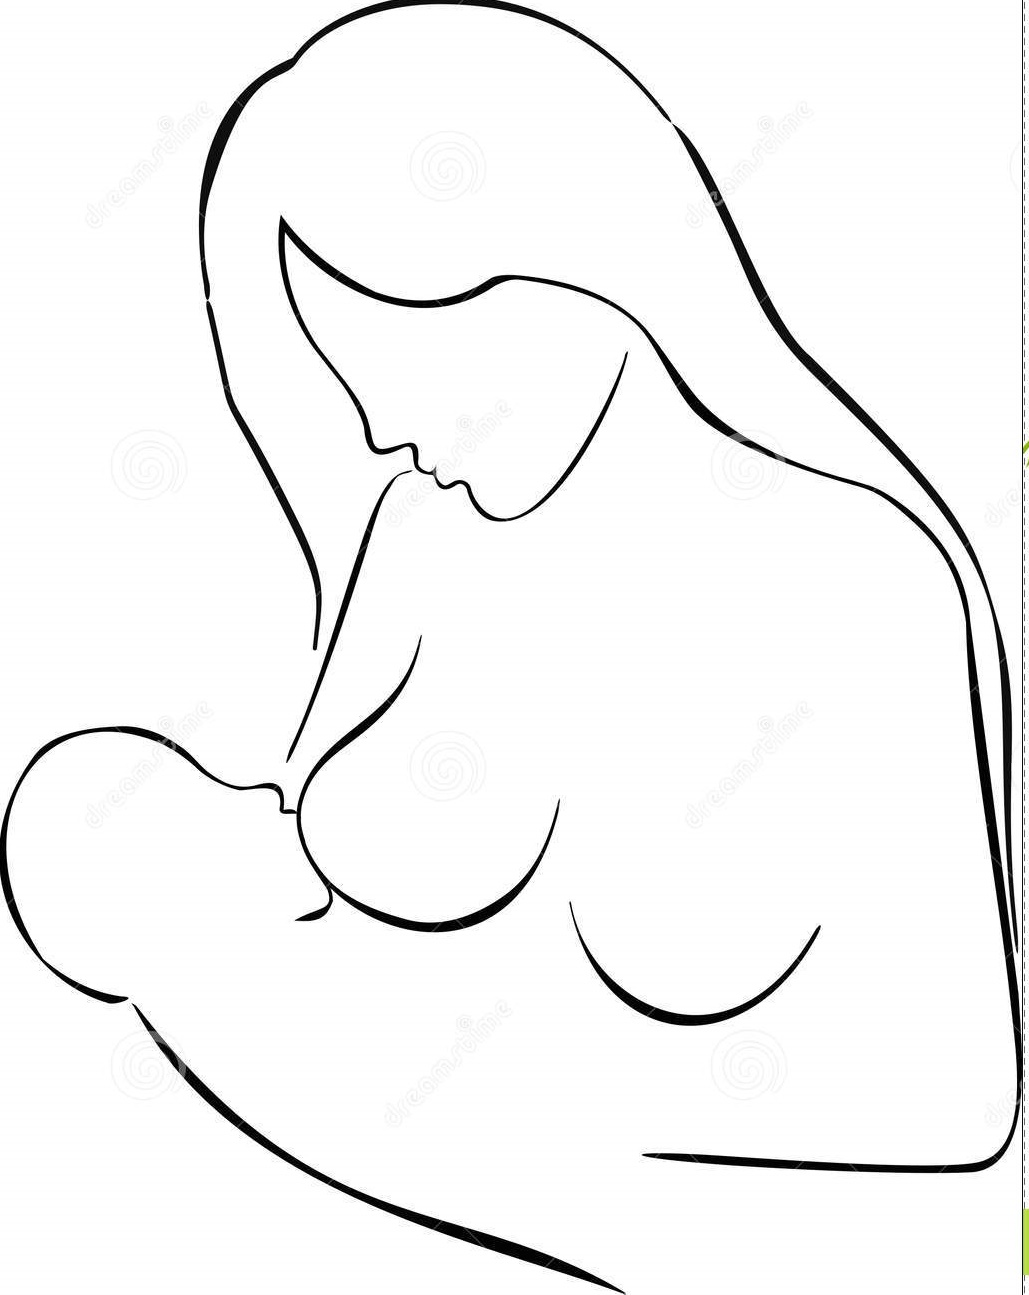 3 Most Common Positions for Breastfeeding